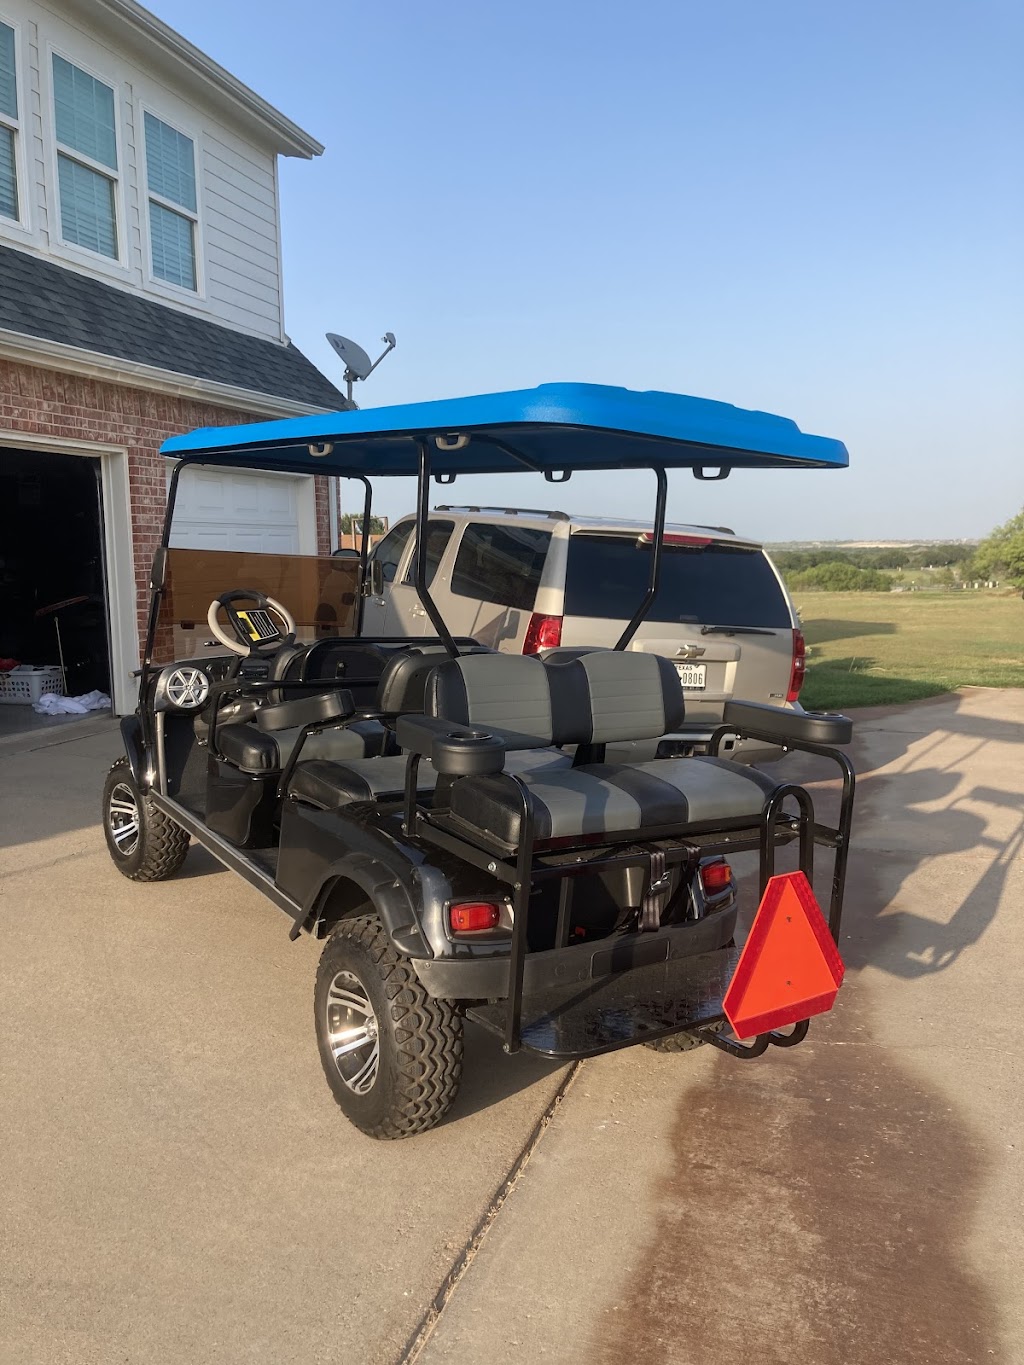 LabledX Golf Carts - store  | Photo 3 of 4 | Address: 1150 Blue Mound Rd W #710, Haslet, TX 76052, USA | Phone: (817) 929-8627